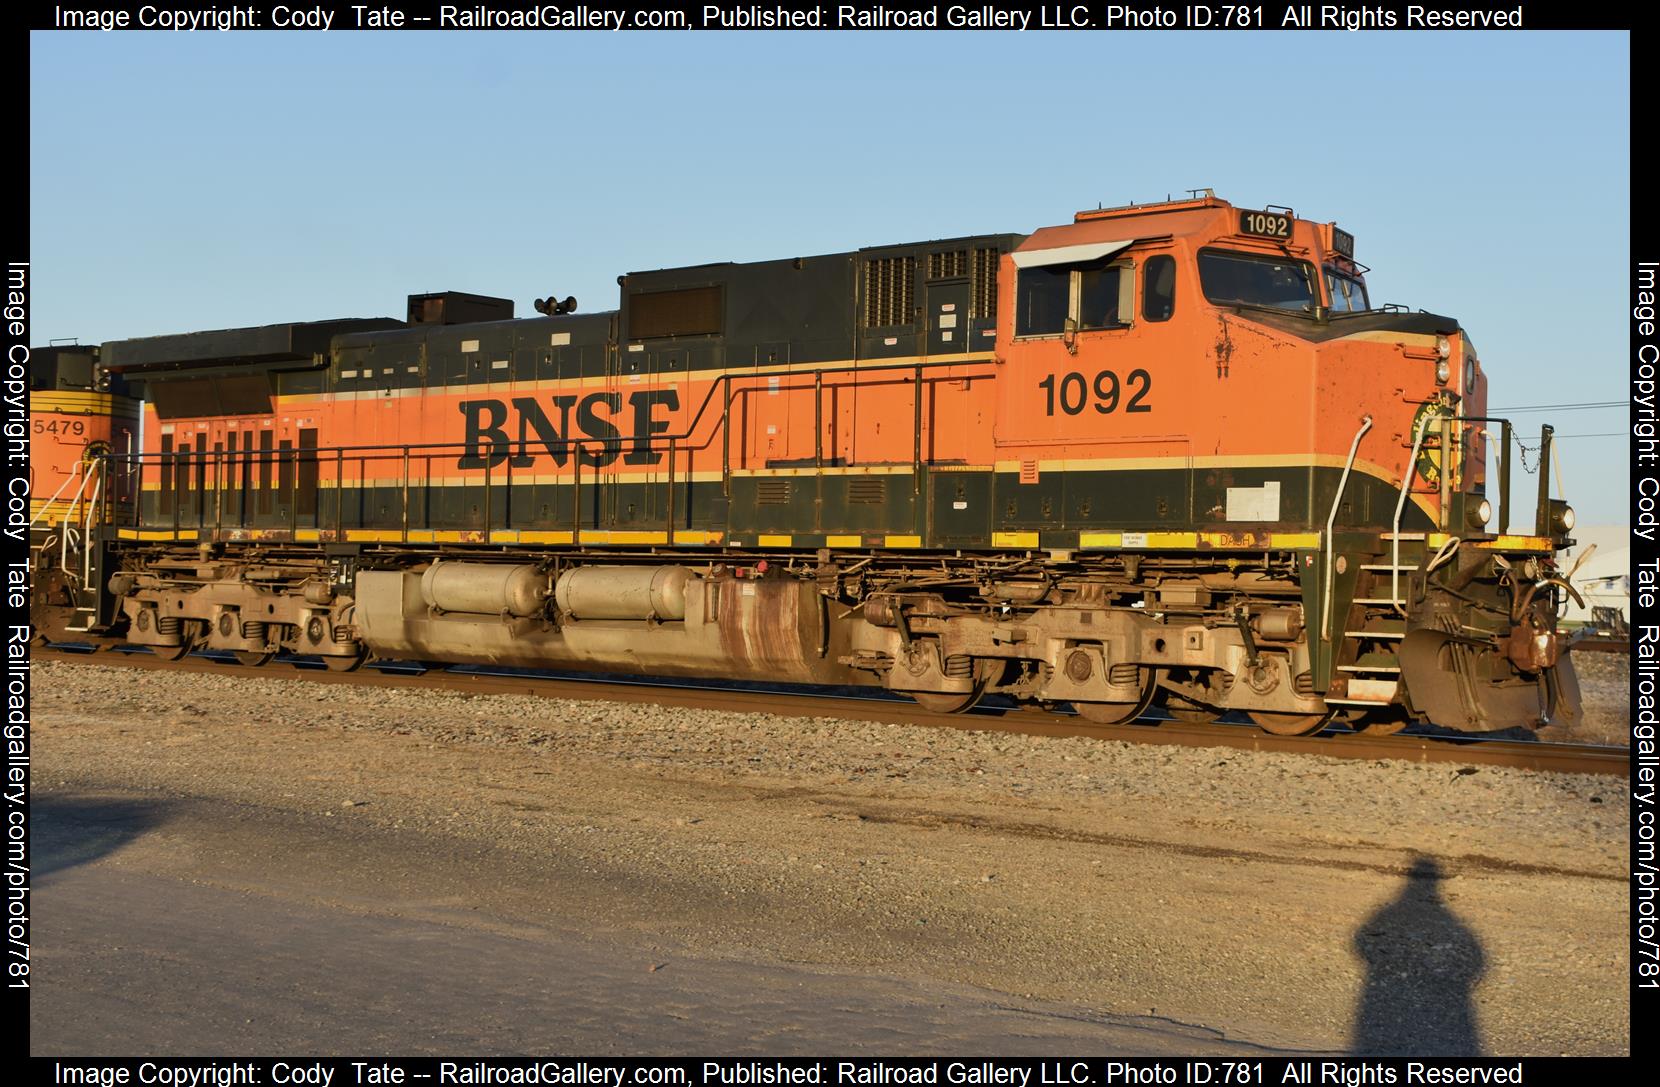 BNSF 1092 is a class C44-9W and  is pictured in Centralia, IL, USA.  This was taken along the Beardstown subdivision  on the BNSF Railway. Photo Copyright: Cody  Tate uploaded to Railroad Gallery on 02/28/2023. This photograph of BNSF 1092 was taken on Tuesday, February 28, 2023. All Rights Reserved. 